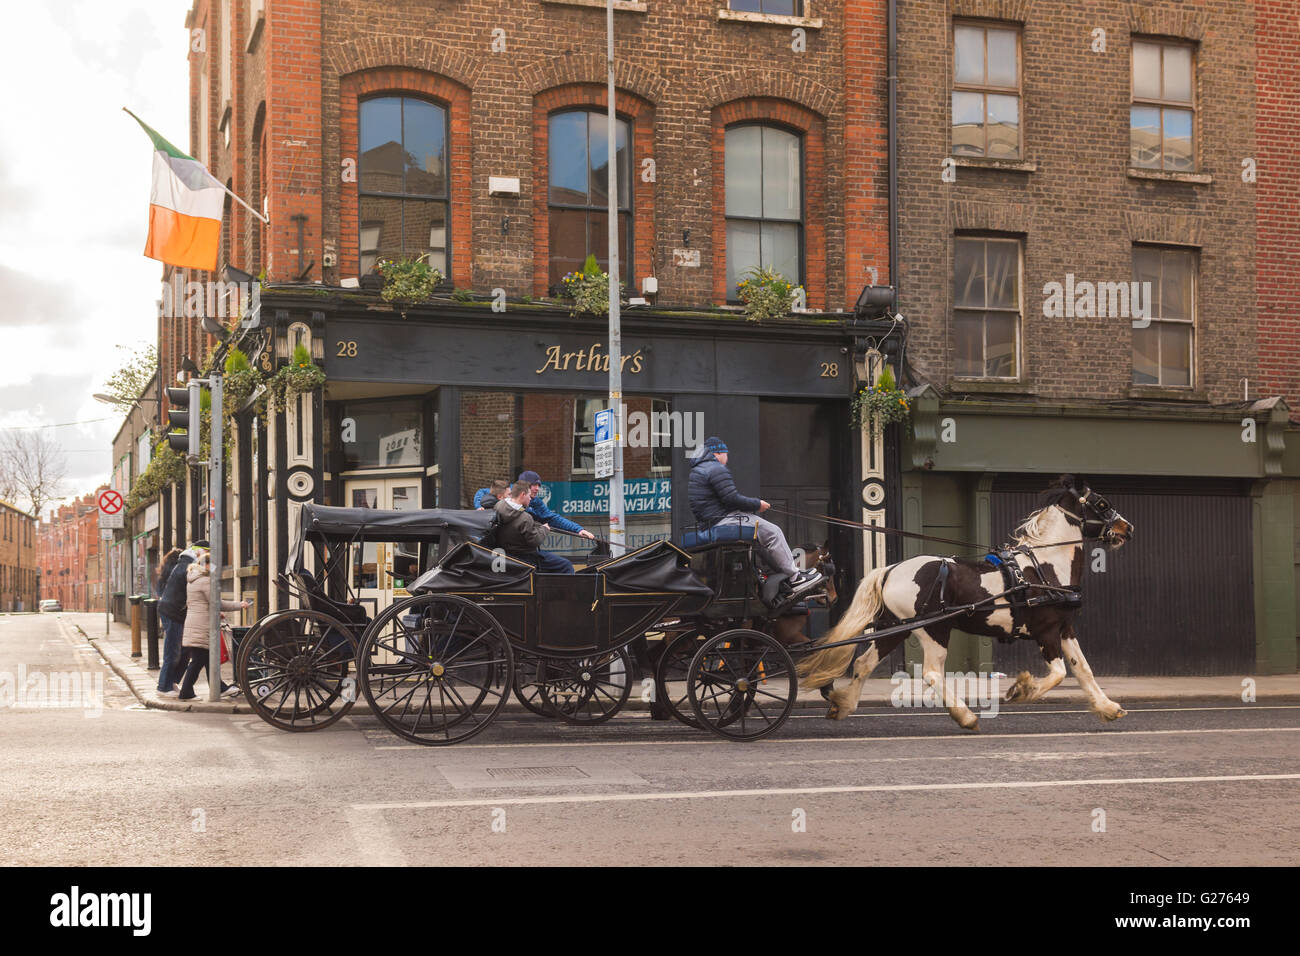 Young men youths driving racing horse drawn carriages in the Liberties area of Dublin, Ireland Stock Photo